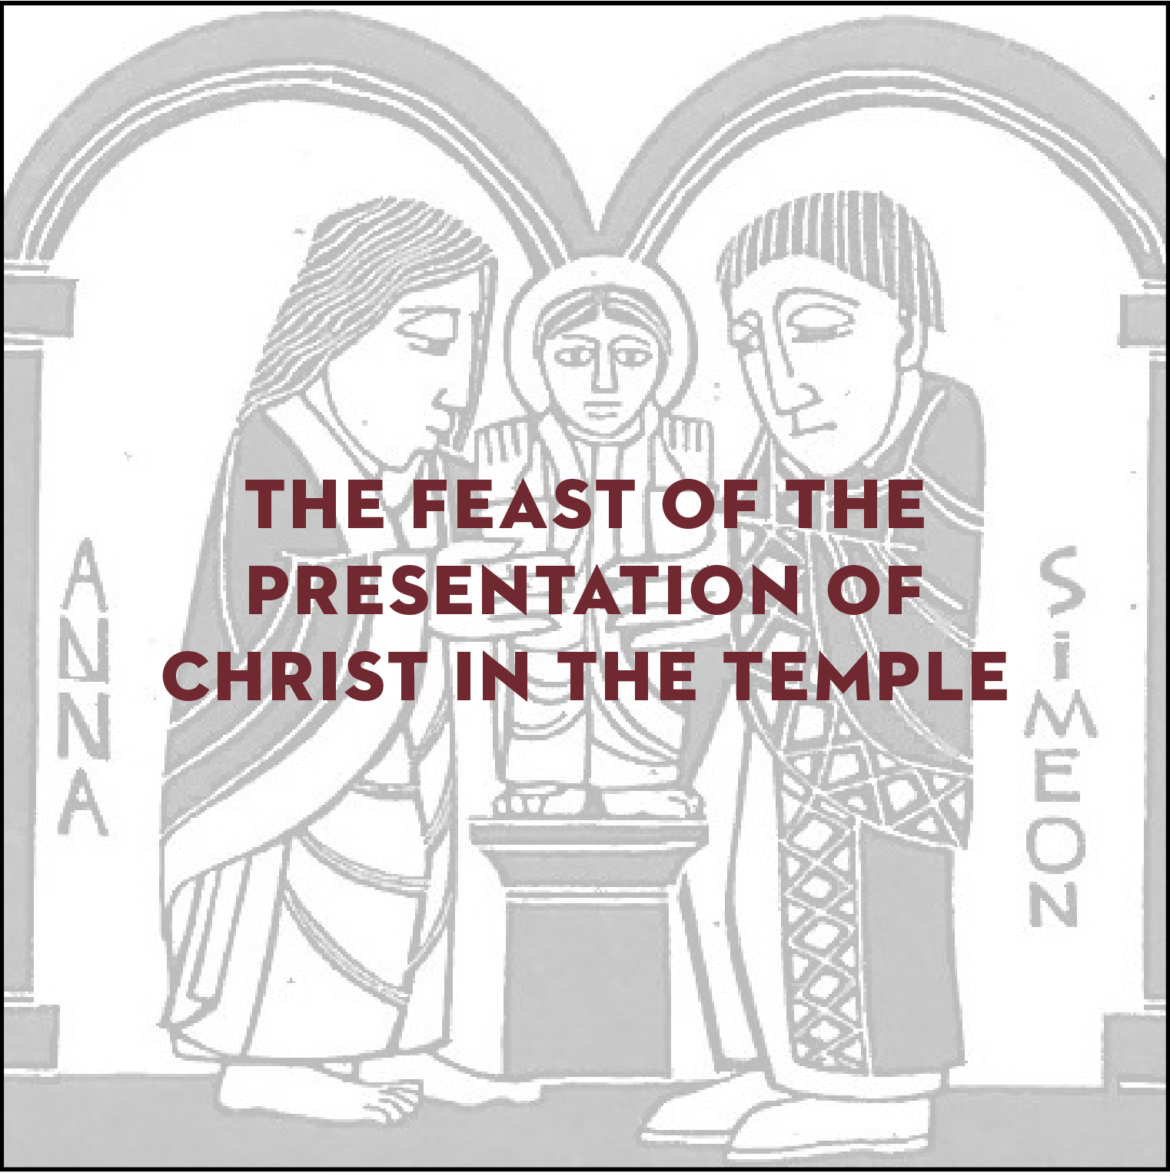 Holy Eucharist for the Feast of the Presentation of Christ in the Temple